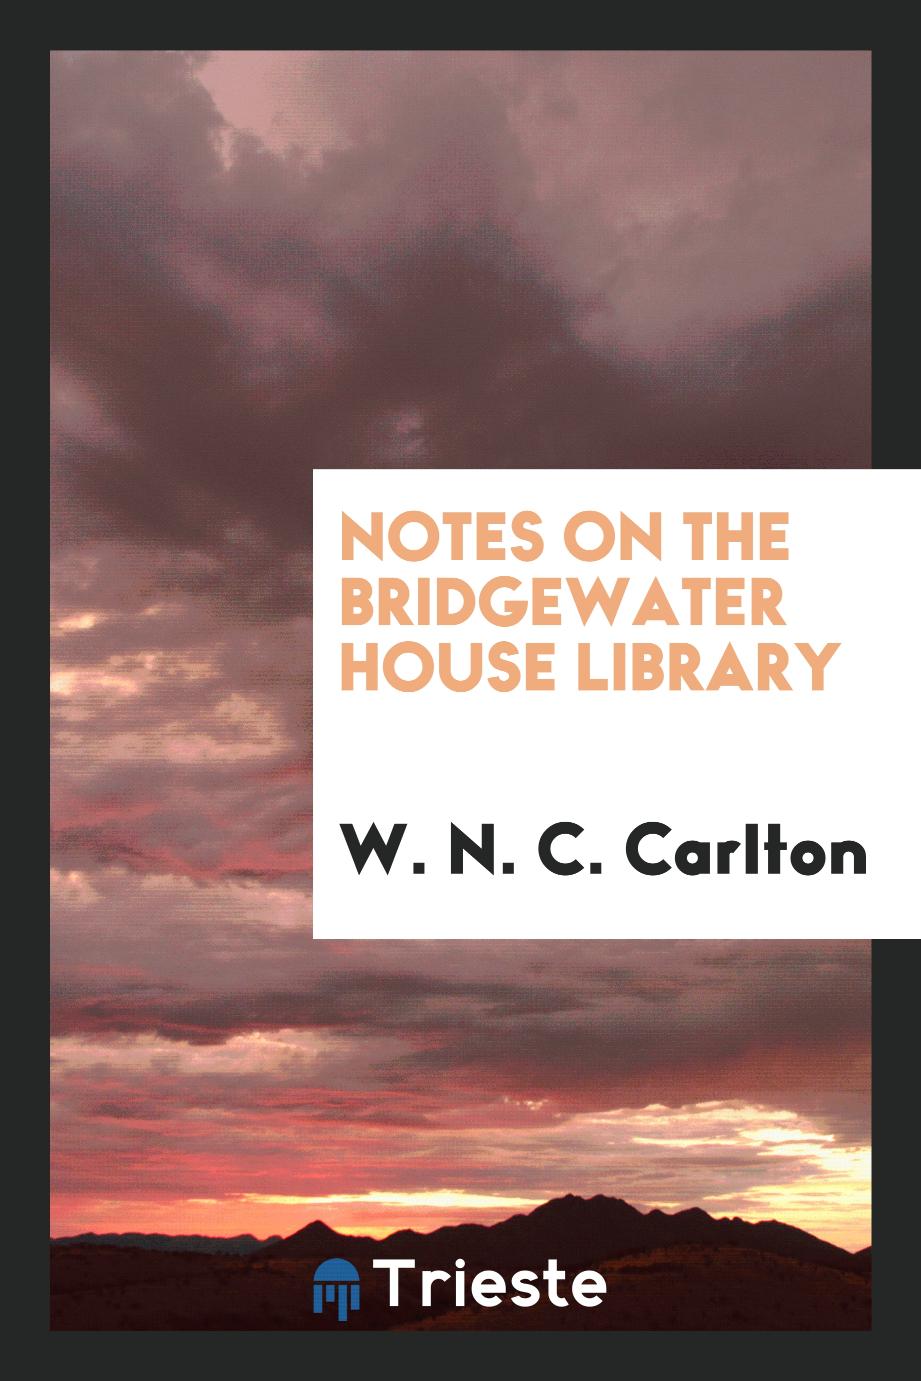 Notes on the Bridgewater house library